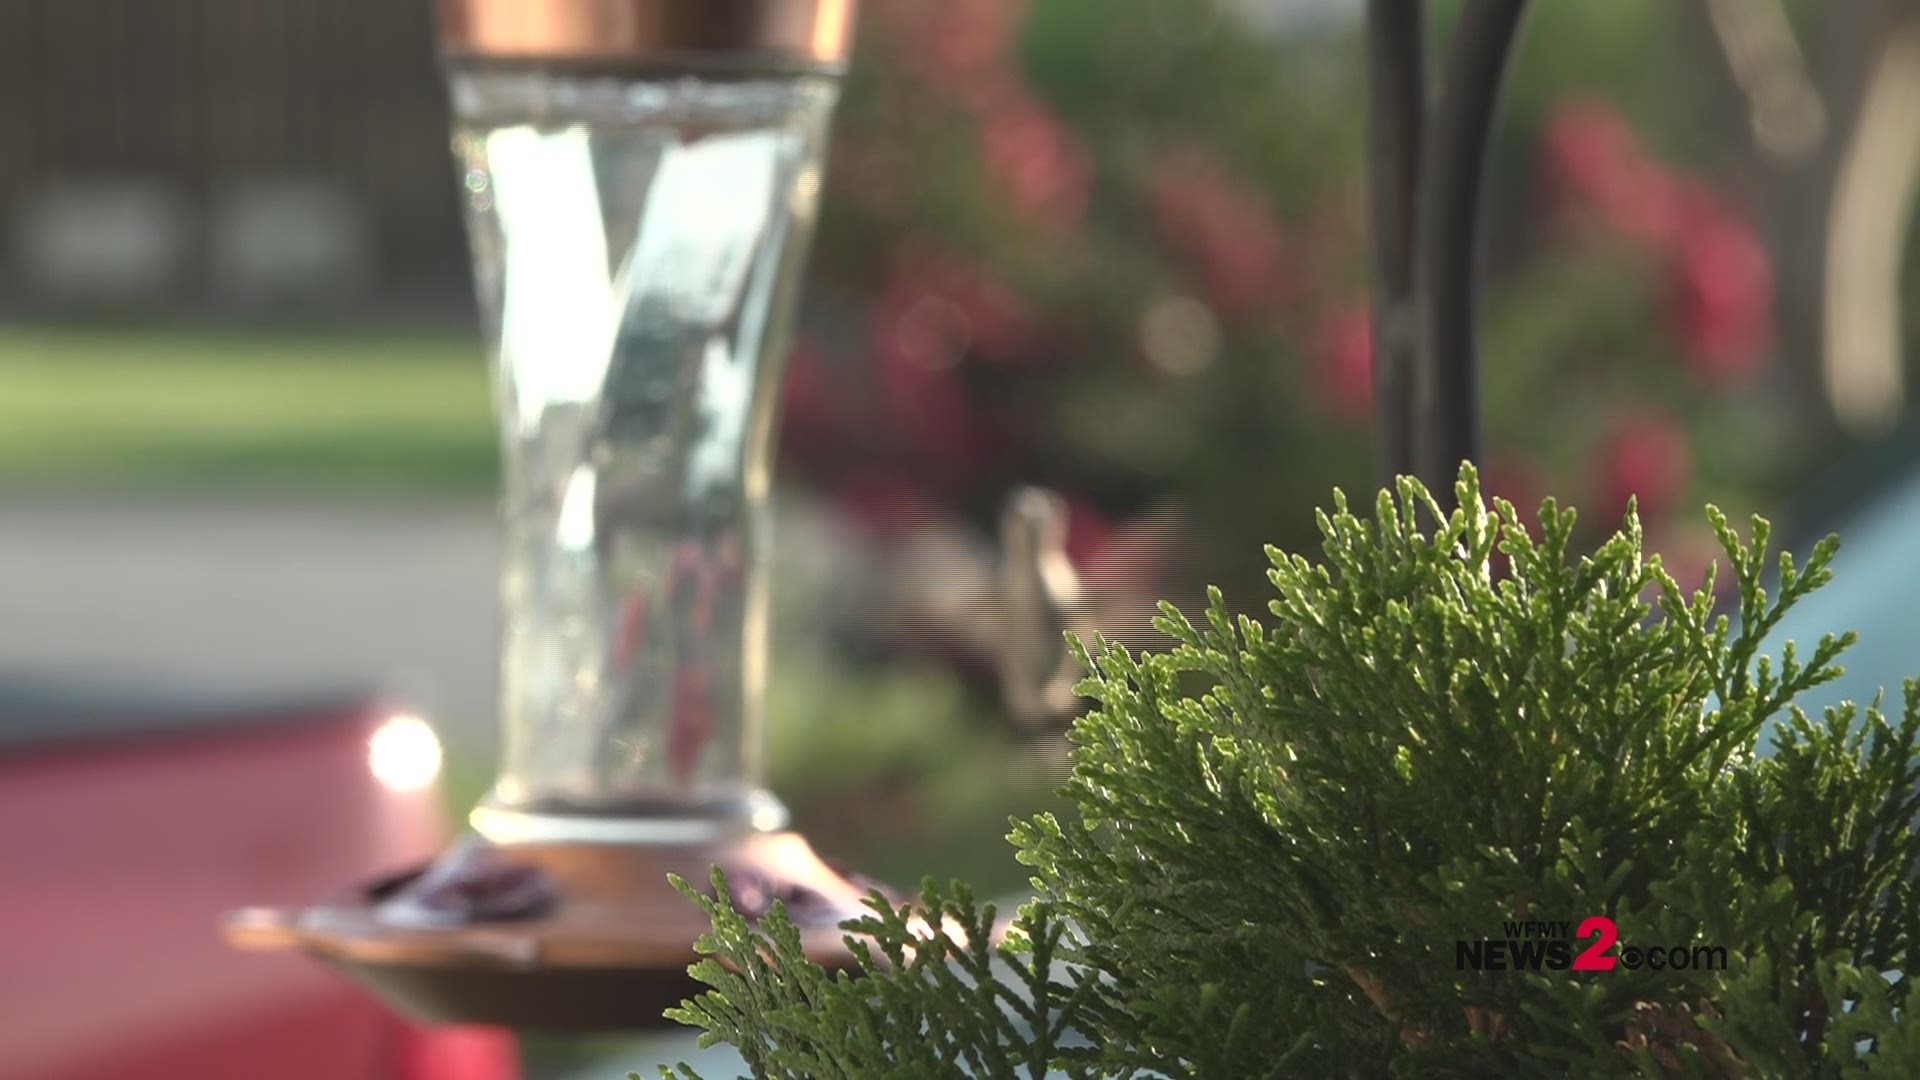 Every year hundreds of hummingbirds make a pit stop in Christian Cates' front yard.